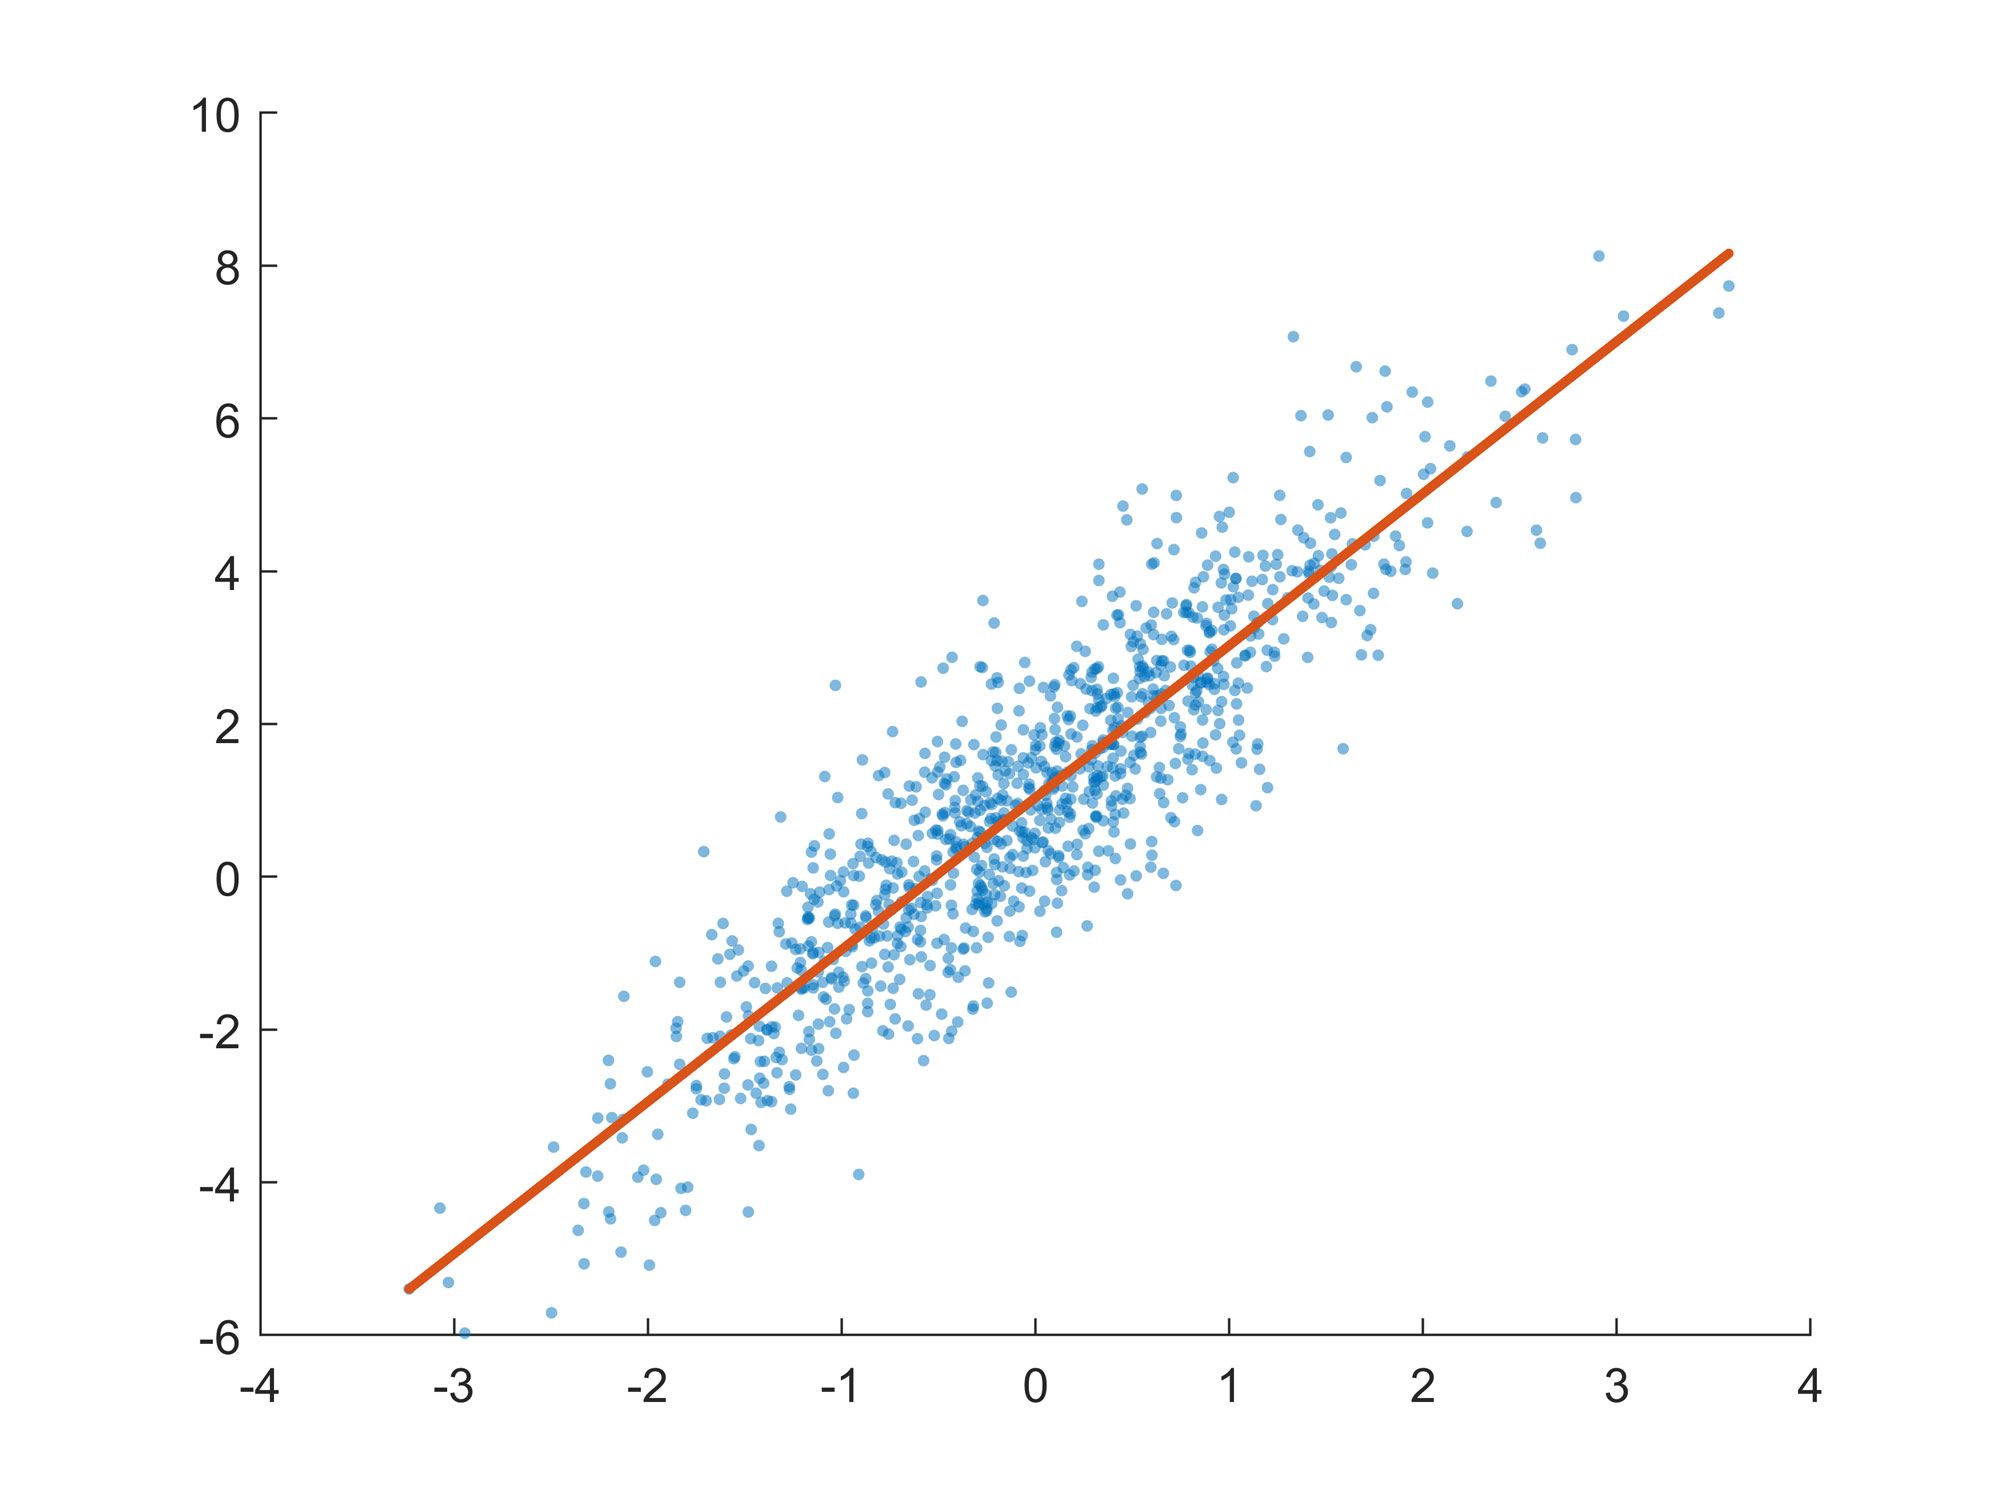 Figure 3. Best-fit line and the underlying scattered data.